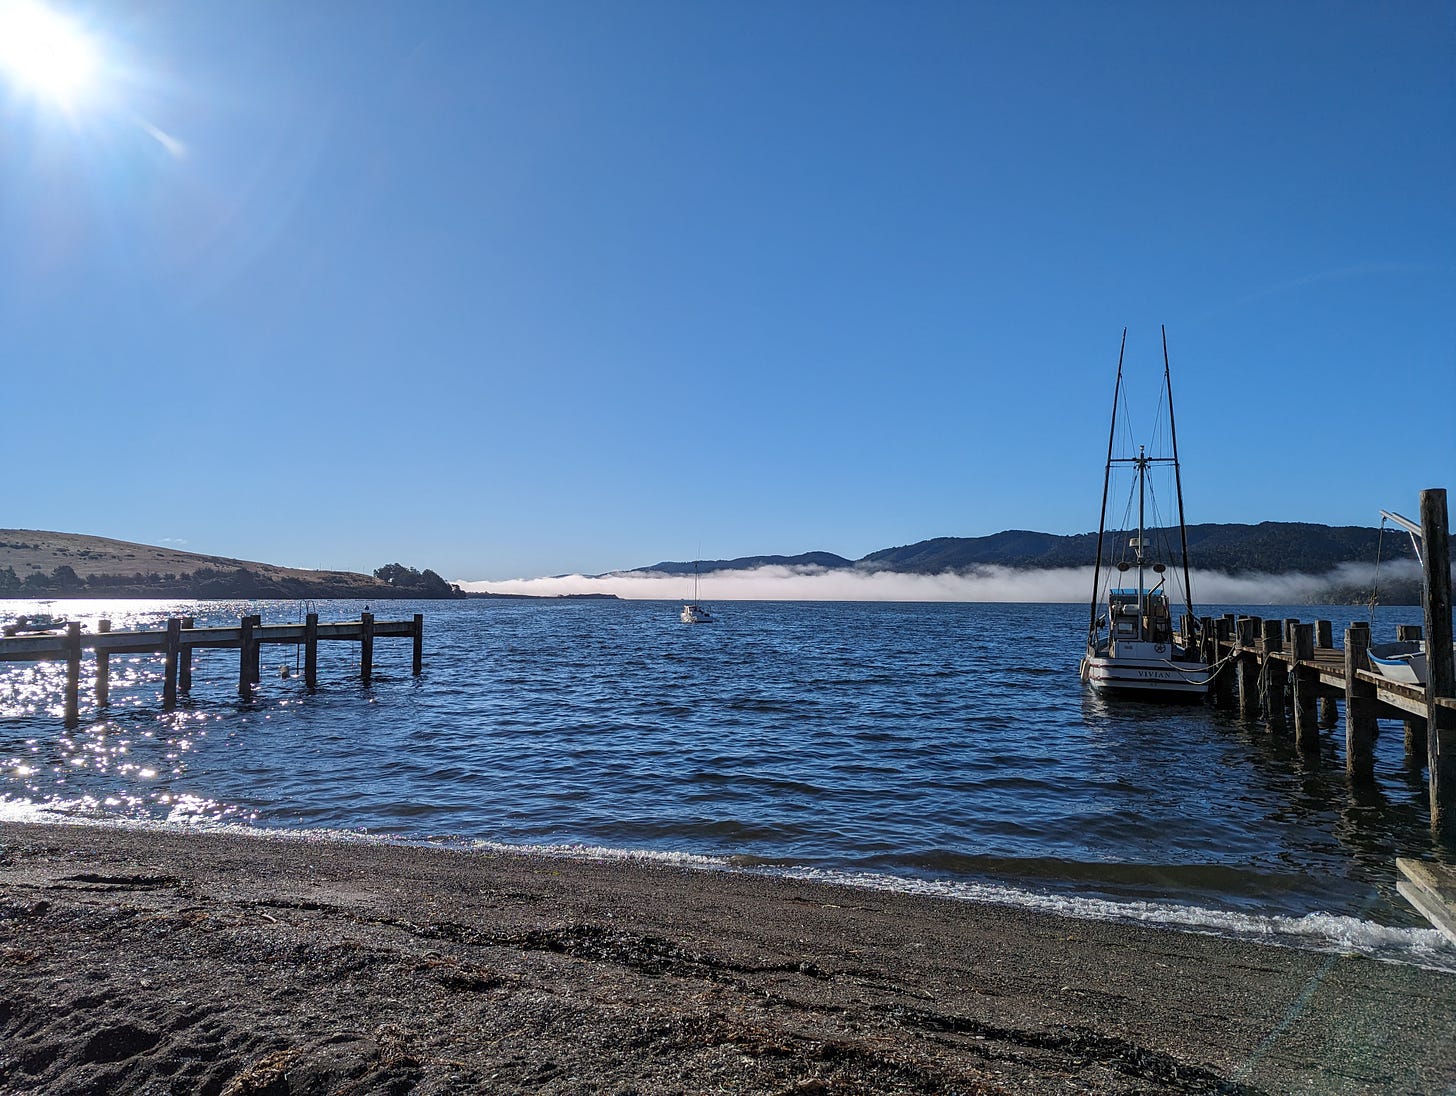 Thin line of fog across Tomales Bay, hills in distance, docked sailboats in foreground